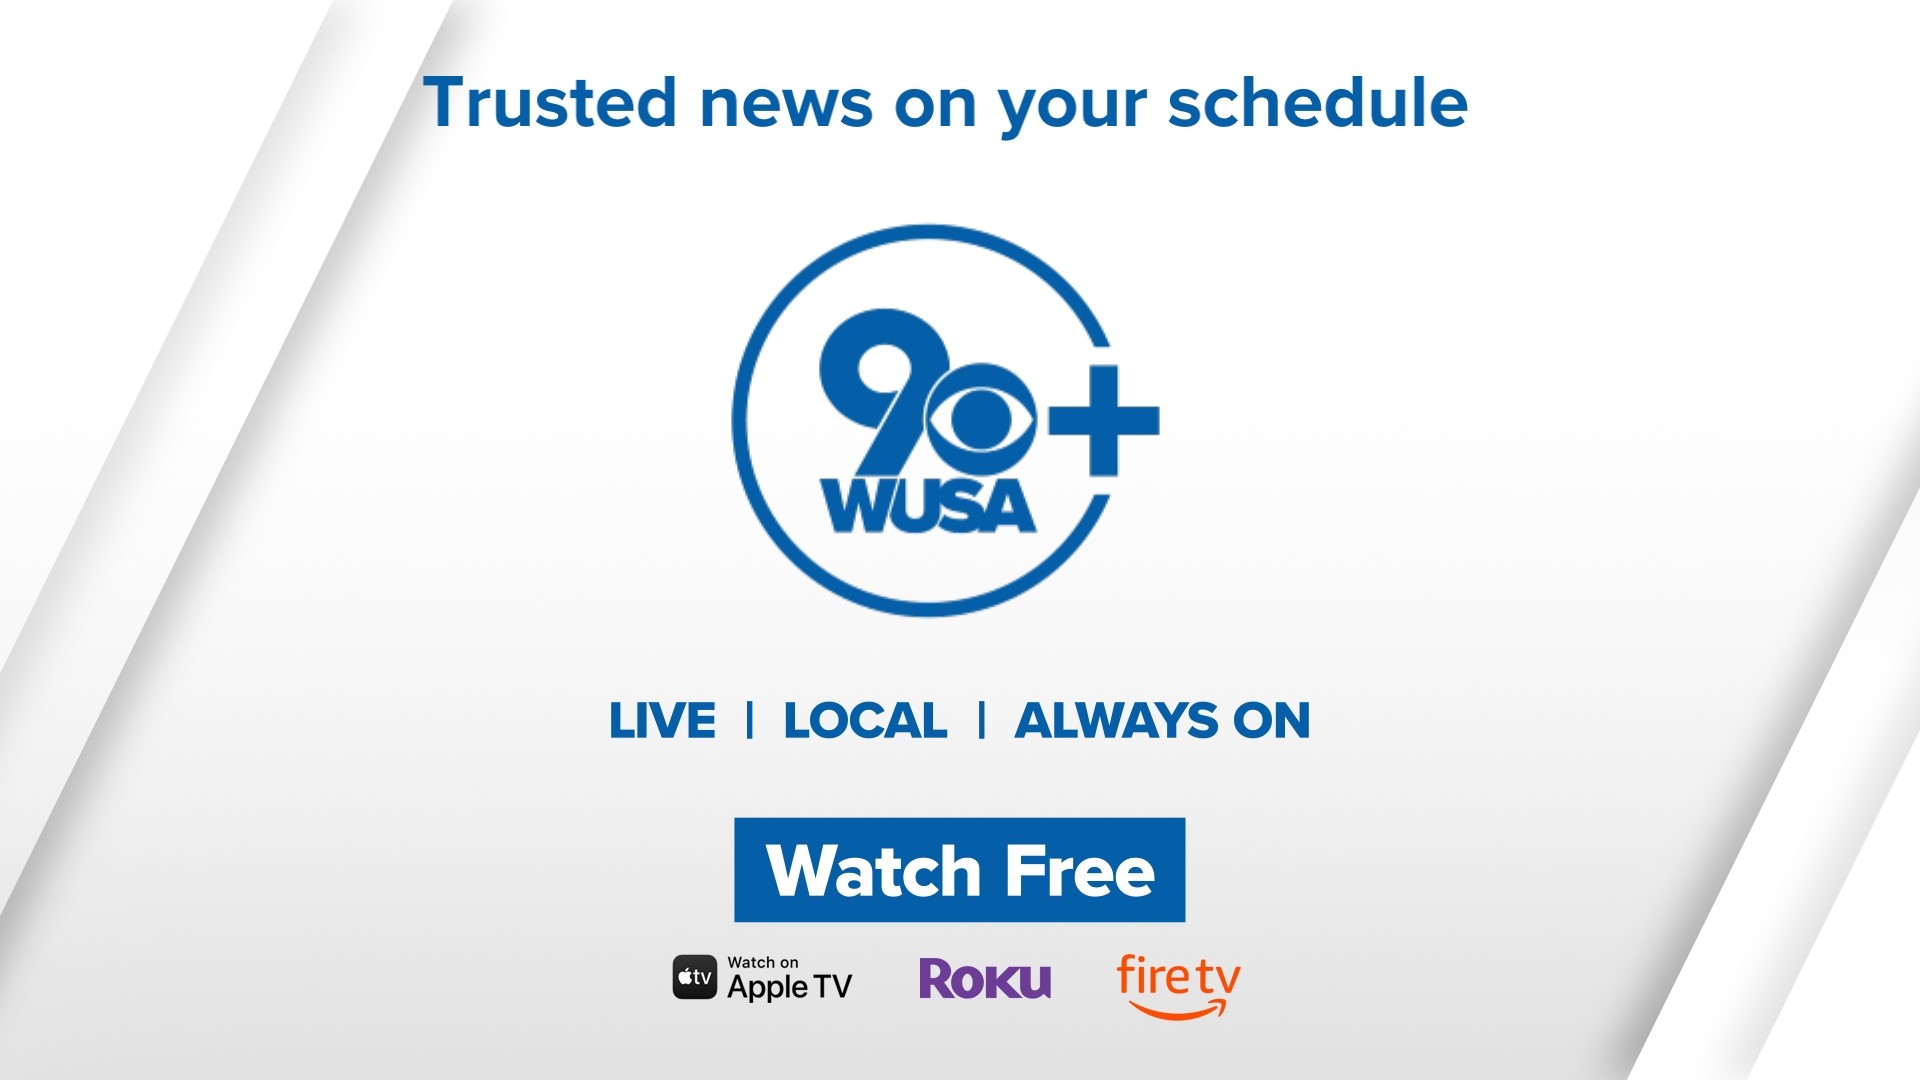 Here's what's streaming today and tomorrow on WUSA9+